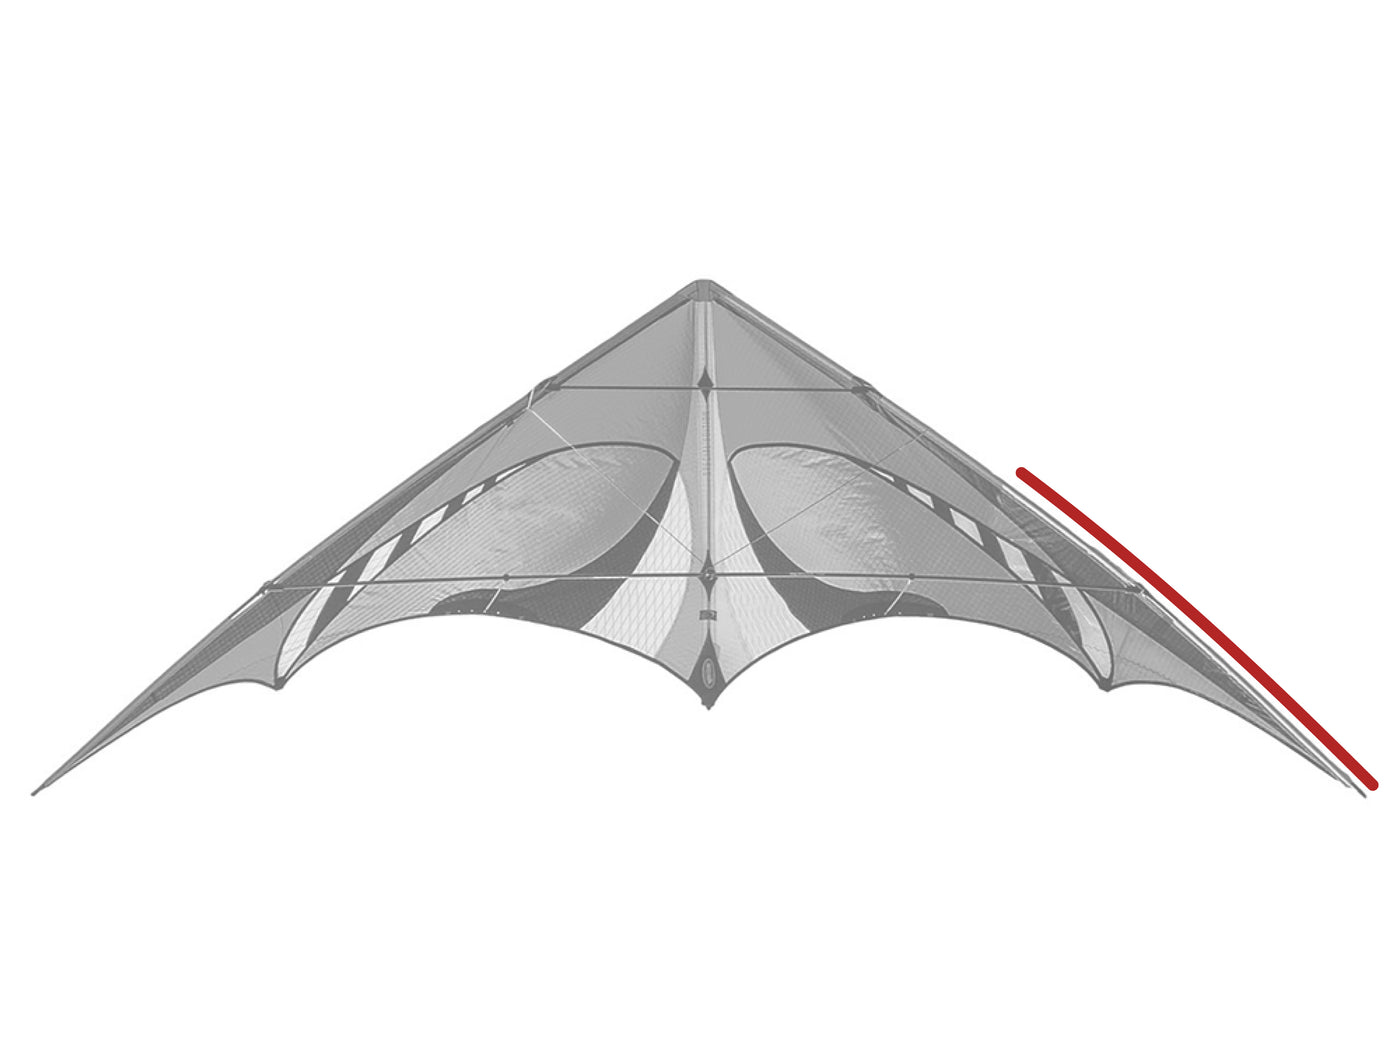 Diagram showing location of the E3 Lower Leading Edge on the kite.